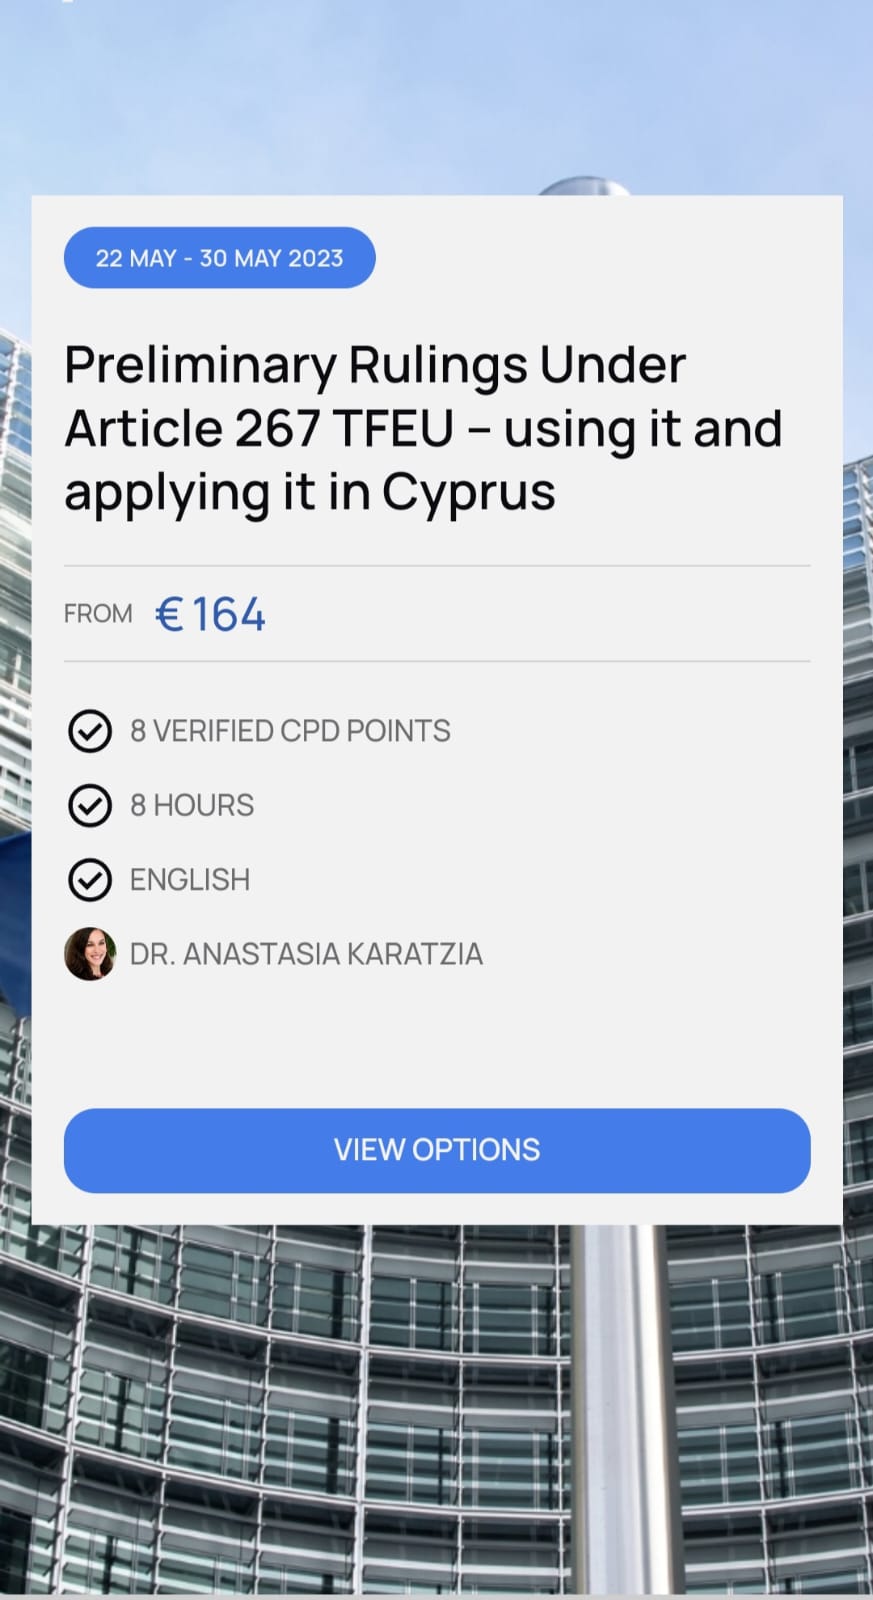 Preliminary Rulings Under Article 267 TFEU – using it and applying it in Cyprus